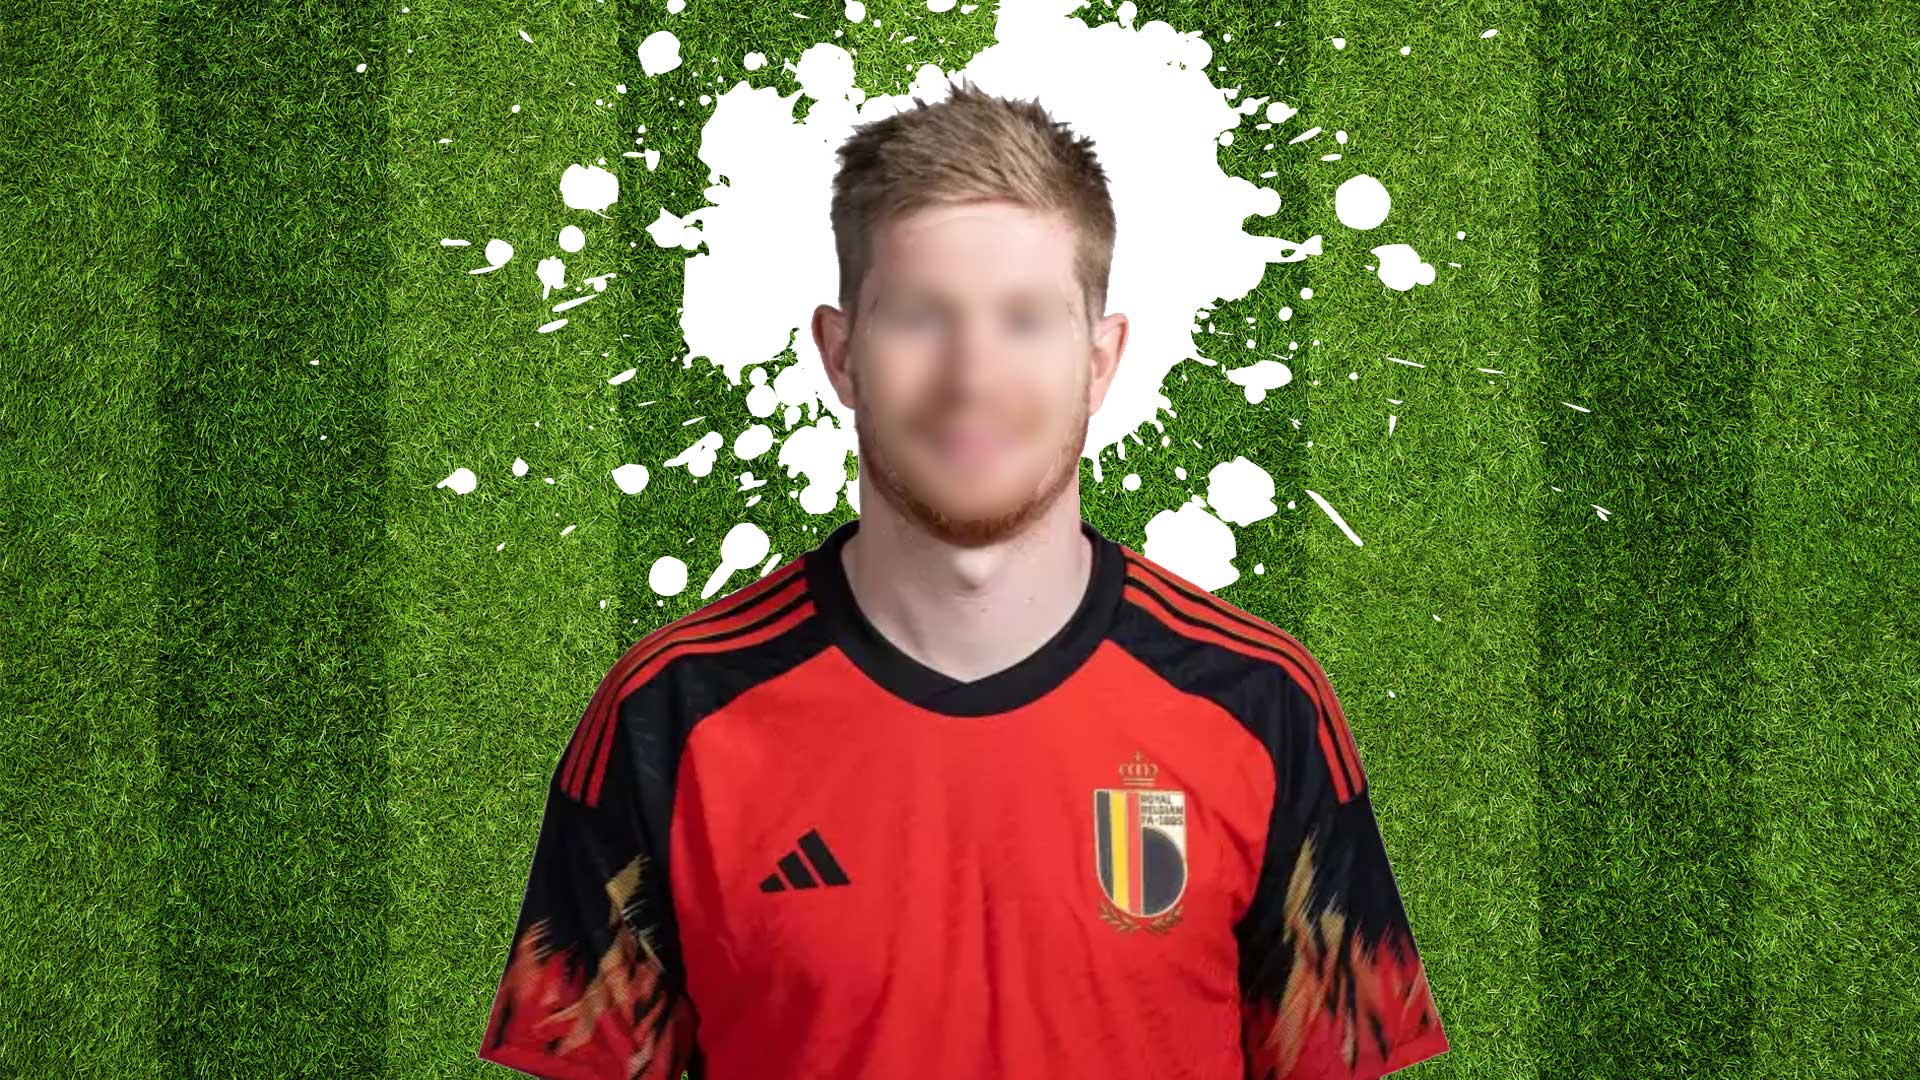 Guess The Football Player - Football Quizzes and Games